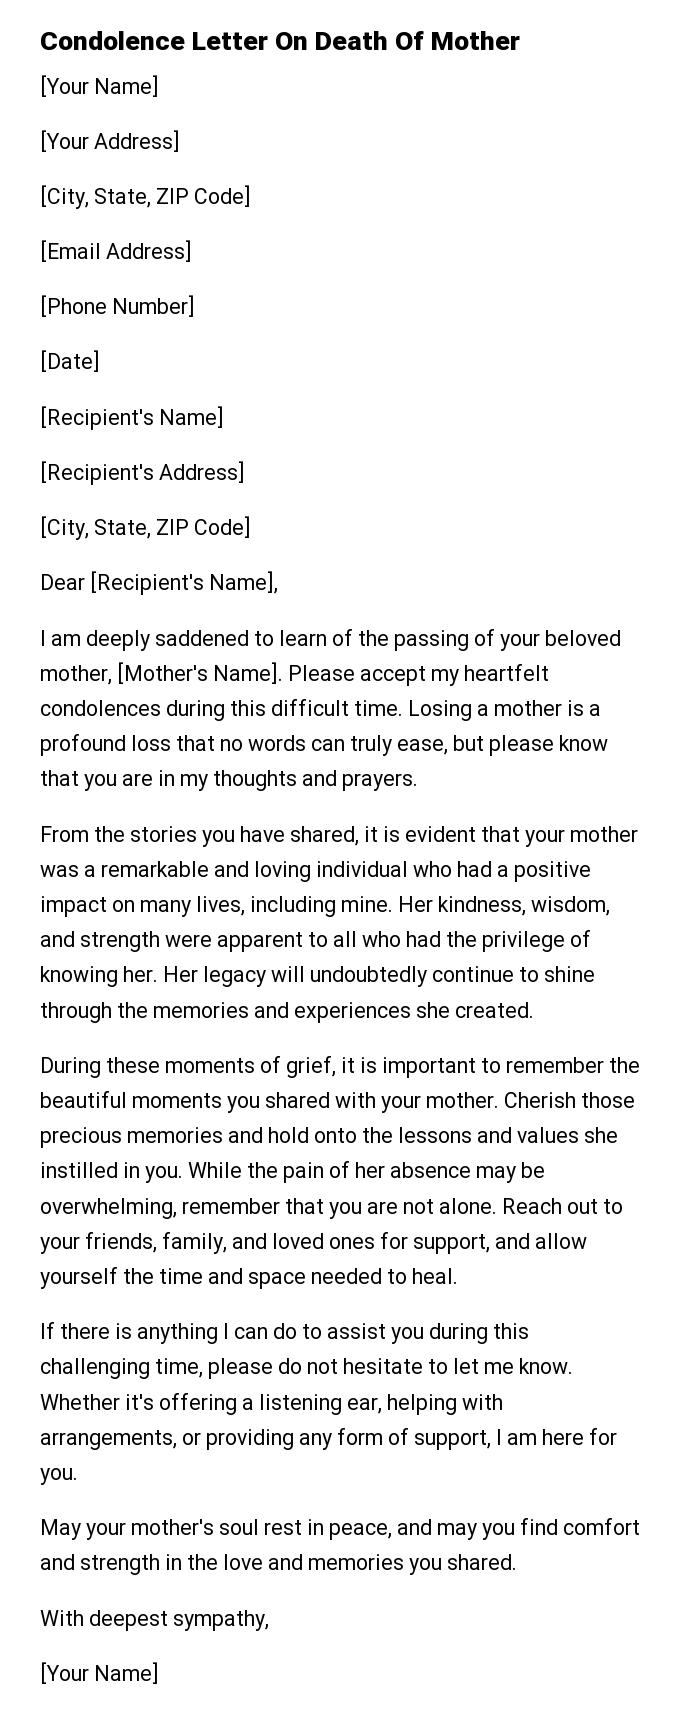 Condolence Letter On Death Of Mother